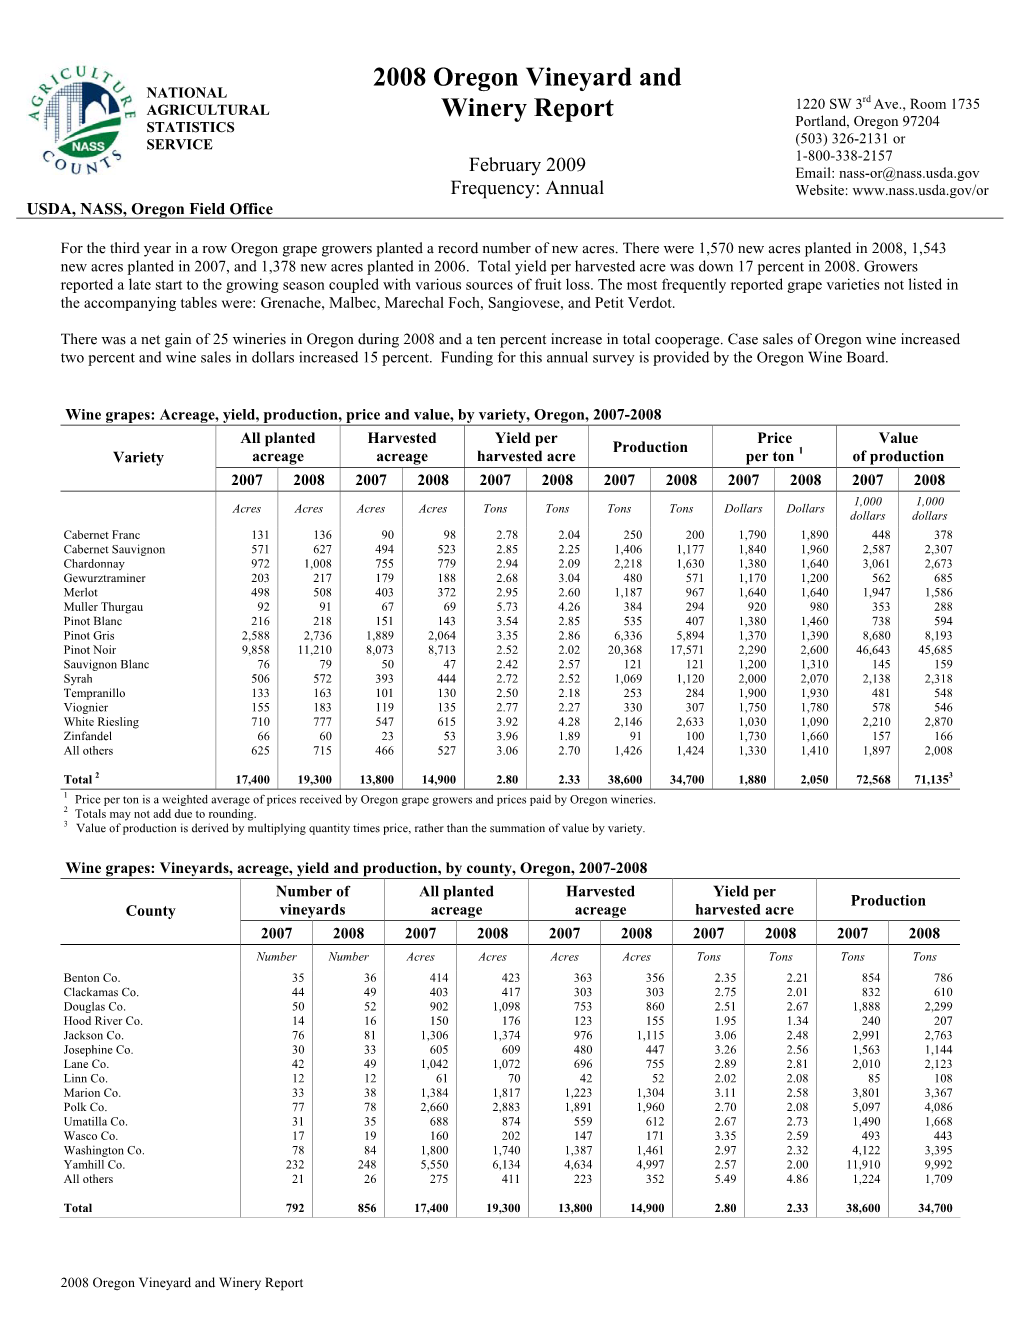 2008 Oregon Vineyard and Winery Report